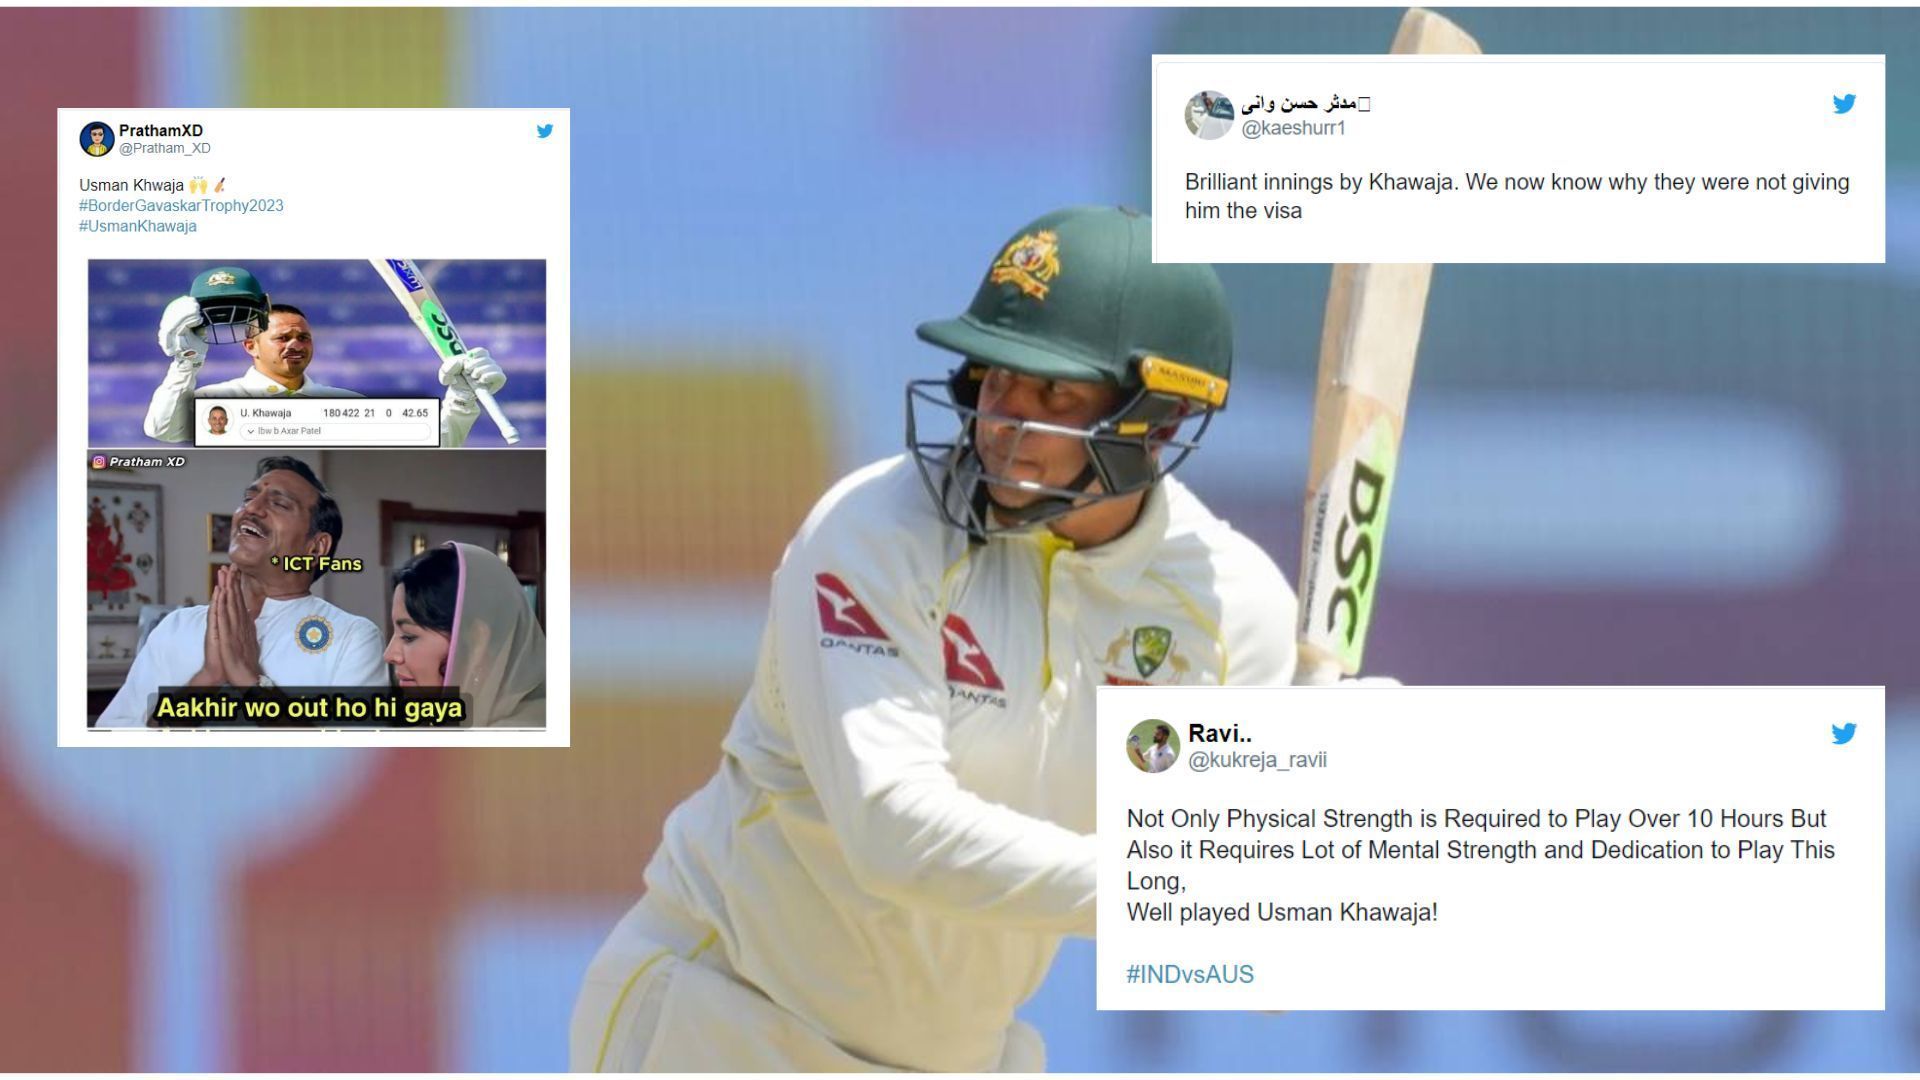 &quot;We now know why they were not giving him the visa&quot; - Twitterati lauds Usman Khawaja